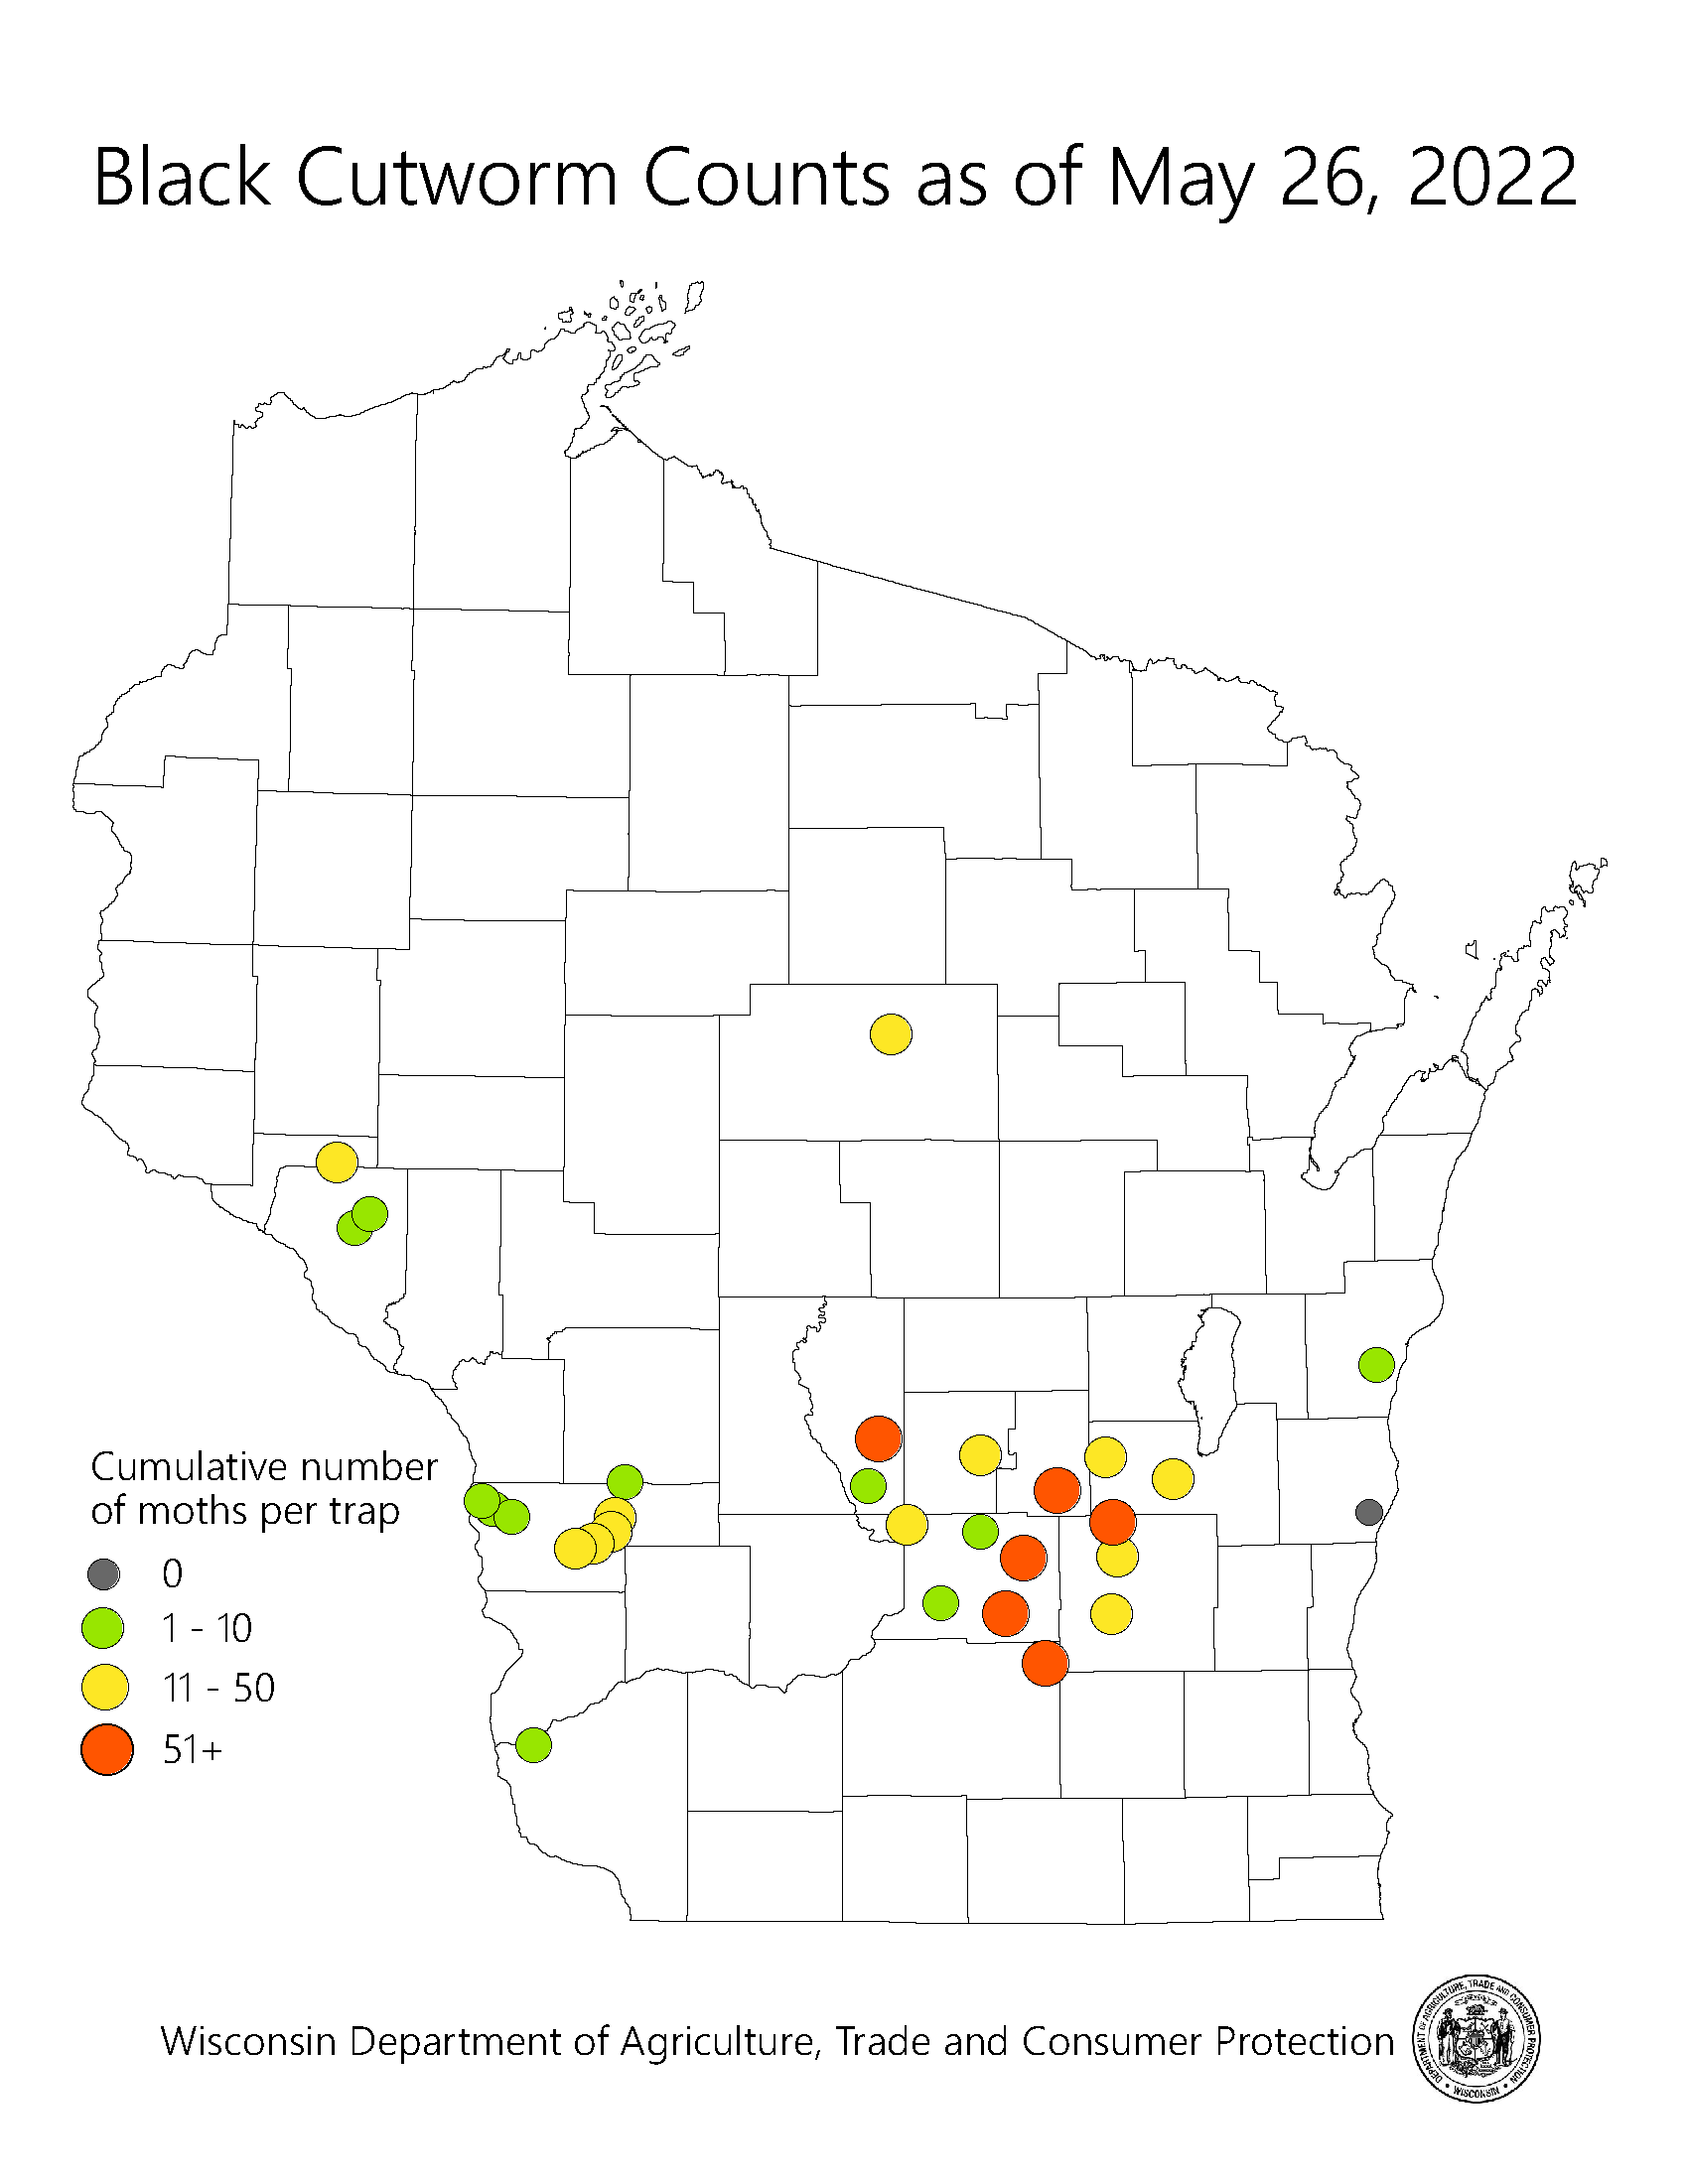 Black Cutworm counts as of May 19, 2022 in the State of Wisconsin